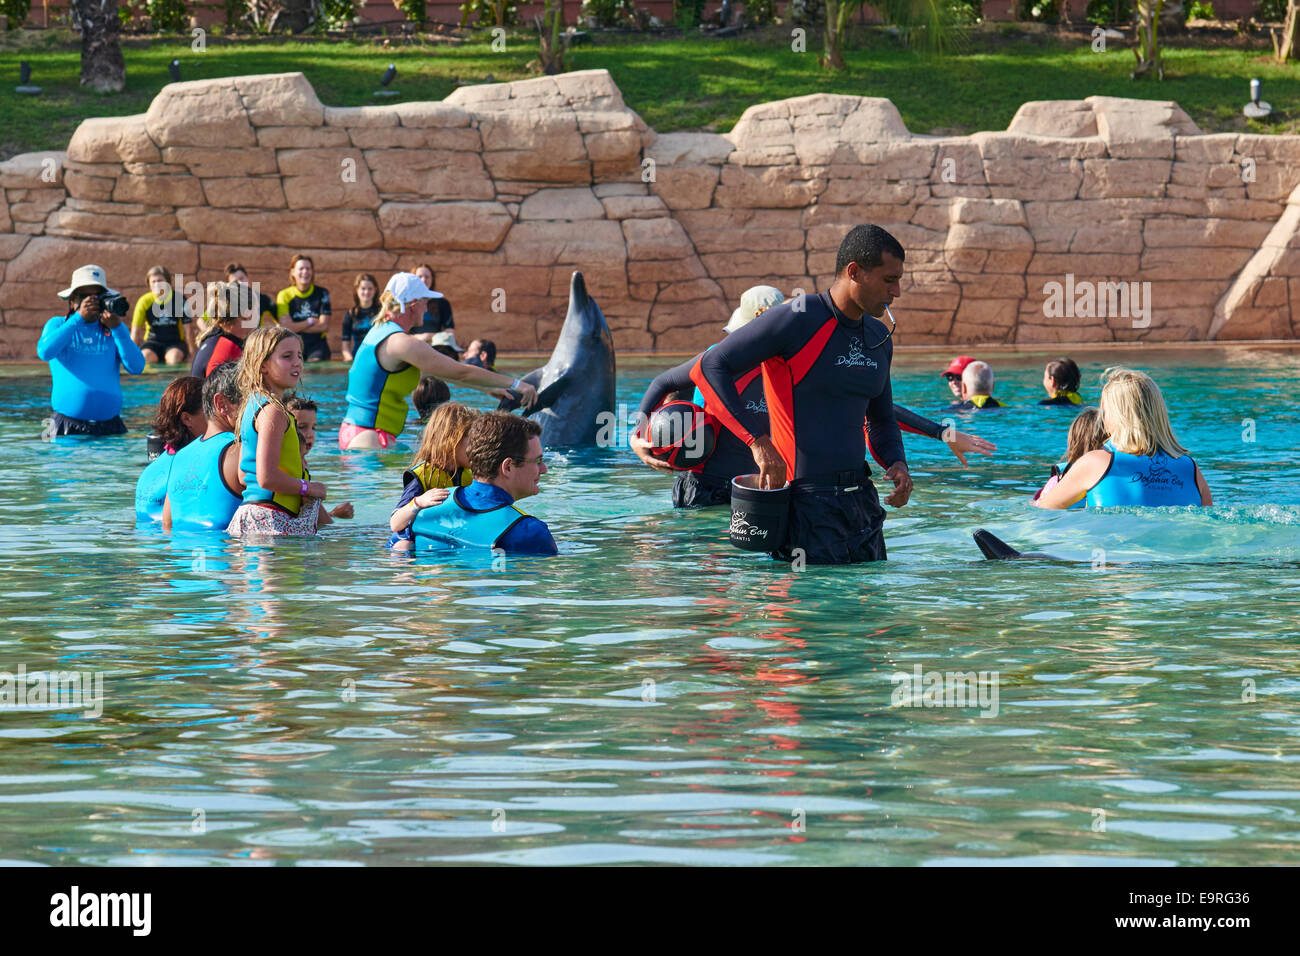 Group Of People Holding And Stroking A Dolphin During A Dolphin Encounter Dolphin Bay The Atlantis Hotel The Palm Dubai UAE Stock Photo